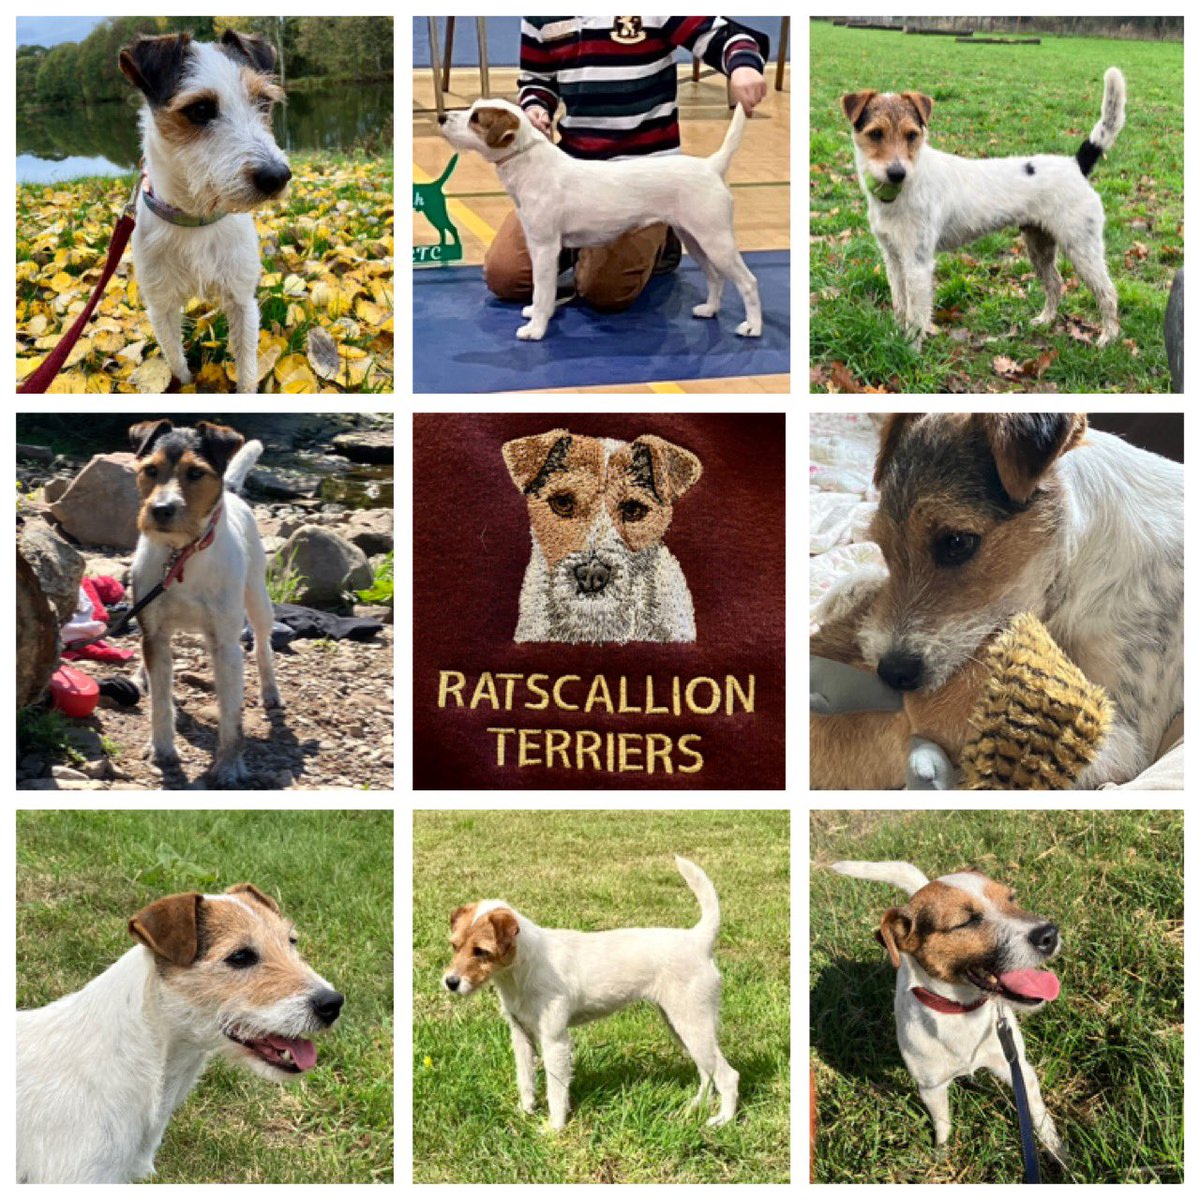 Wishing you all a #happynewyear and a healthy #2023. It’s been a blast! #happybirthday to Dexter who is one today 🎂See you next year! #dogs #dog #DogsOnTwitter #dogsoftwitter #PRTposse #parsonrussellterrier